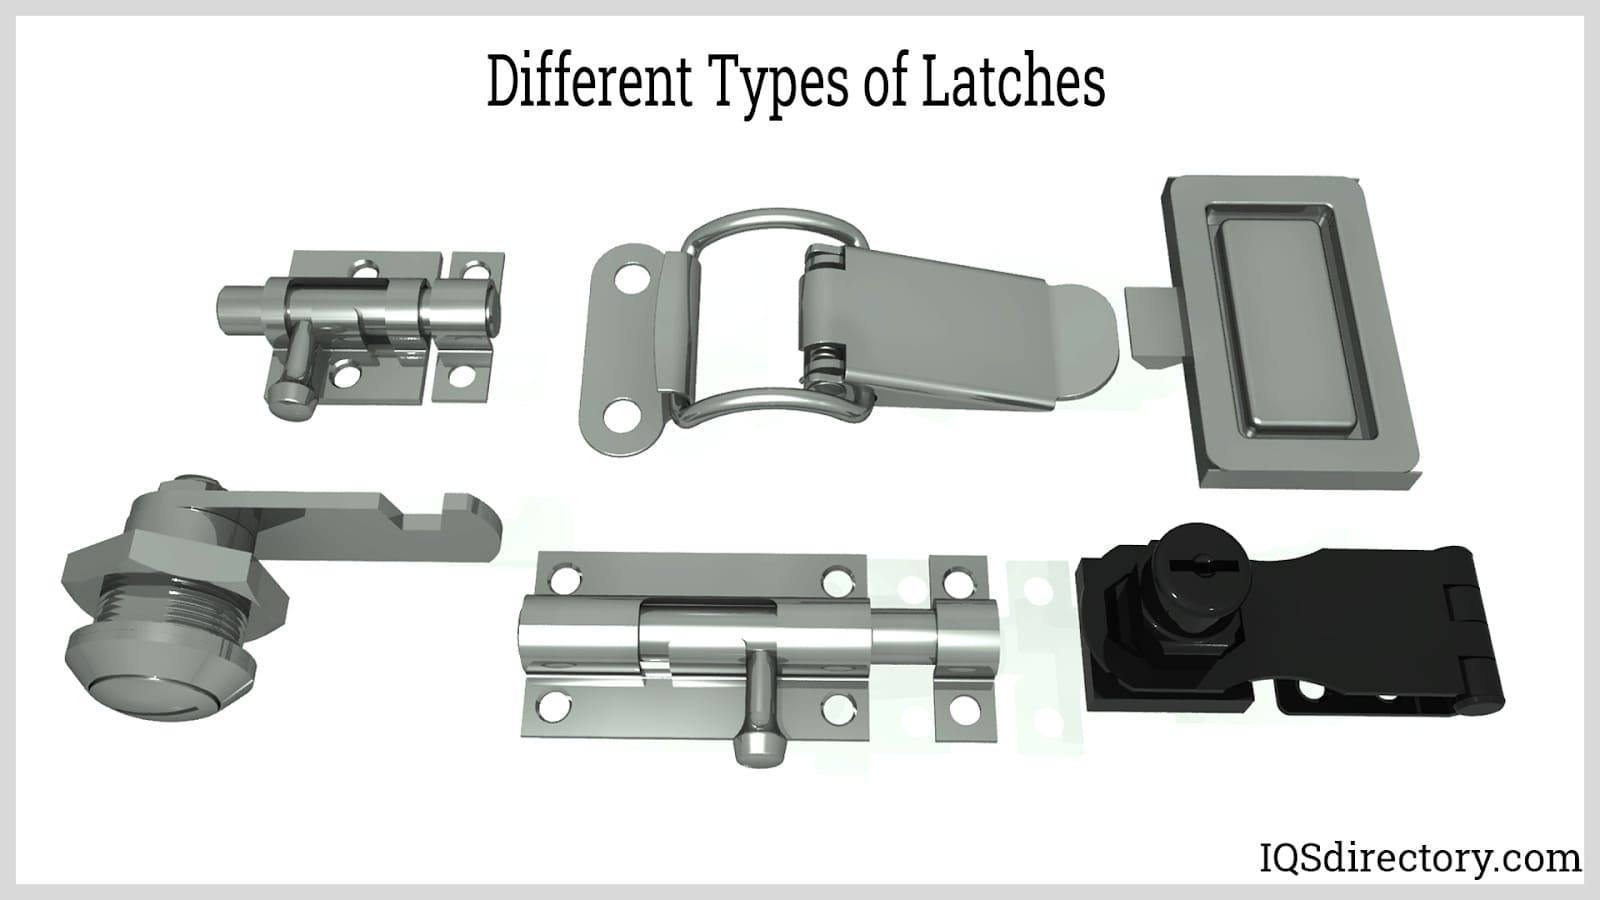 Different Types of Latches